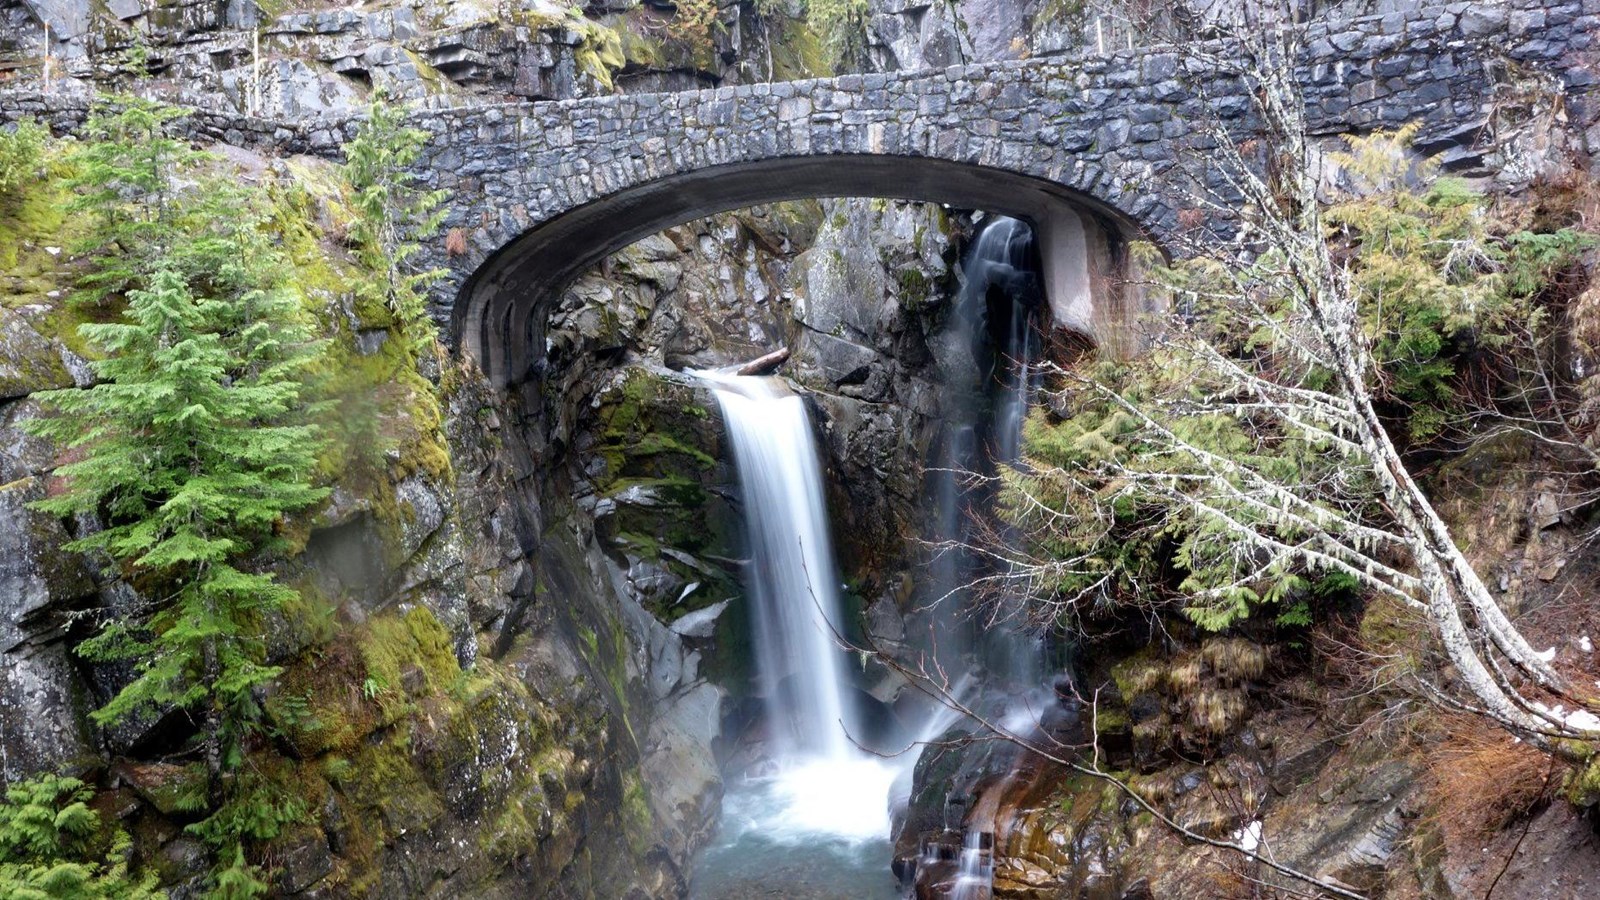 A gray stone bridge creates a unique frame for water cascading down a rocky ledge into a river below